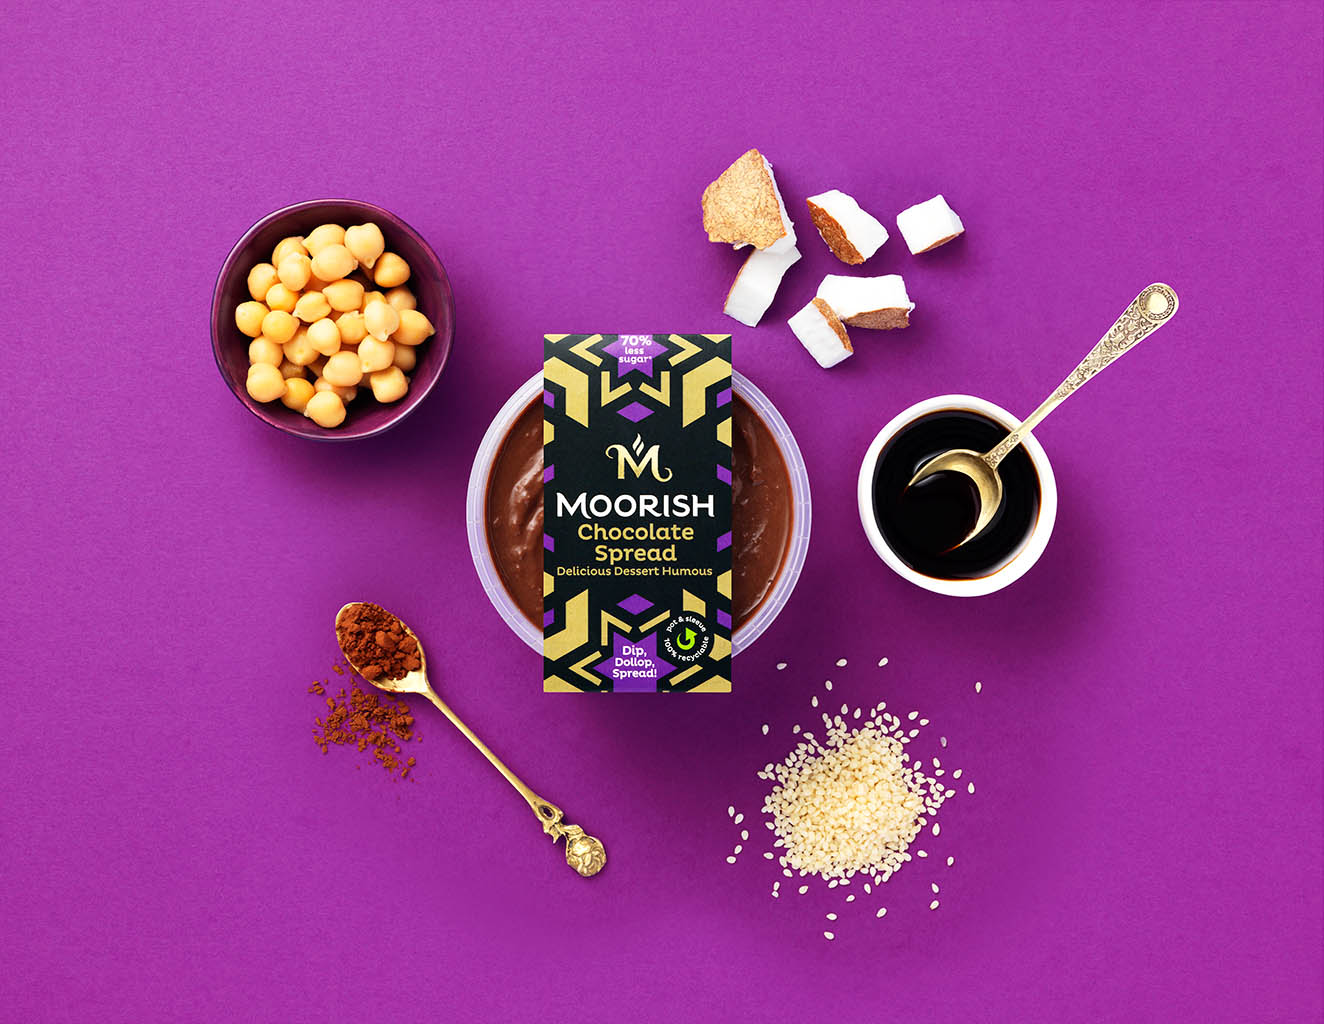 Food Photography of Moorish chocolate spread with ingredients by Packshot Factory